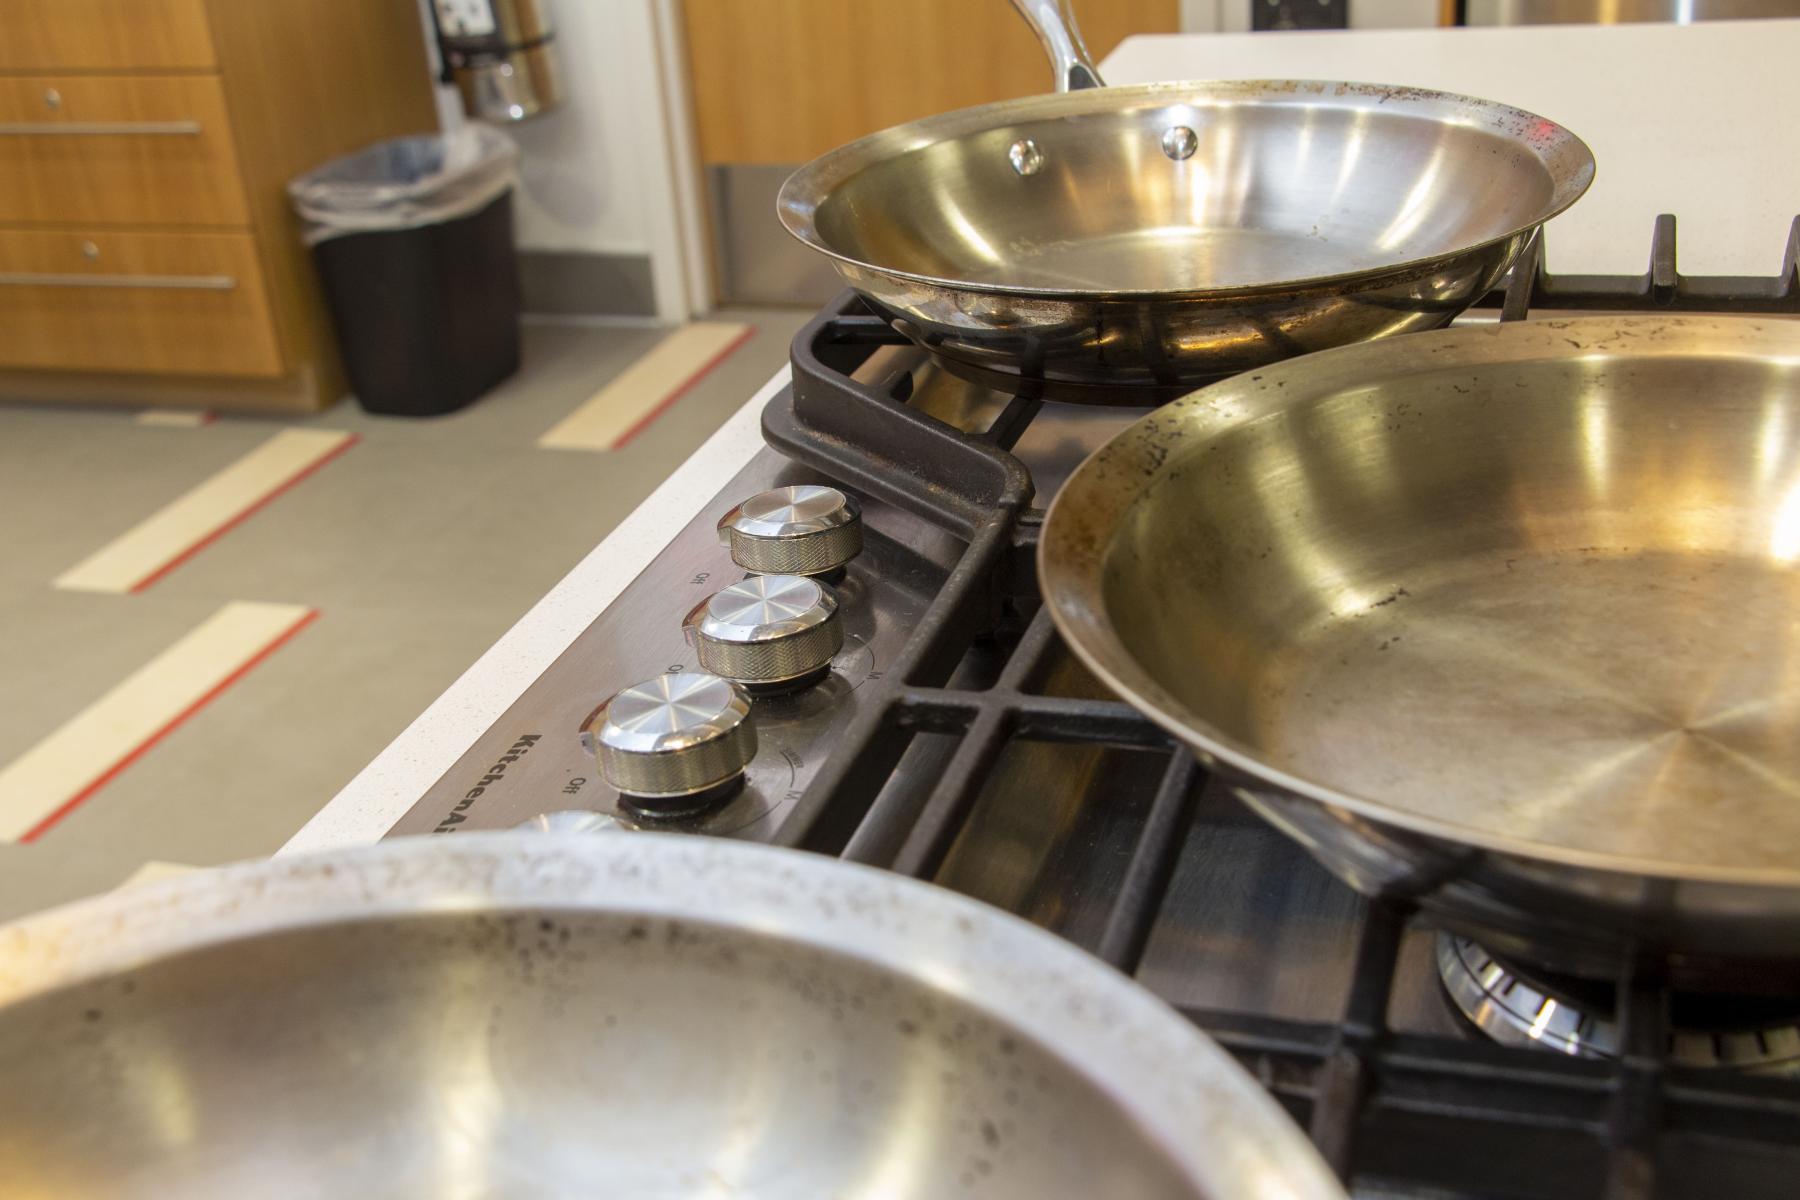 Pots sit on the stove top of the Wellness Kitchen at the Recreation and Wellness Center.